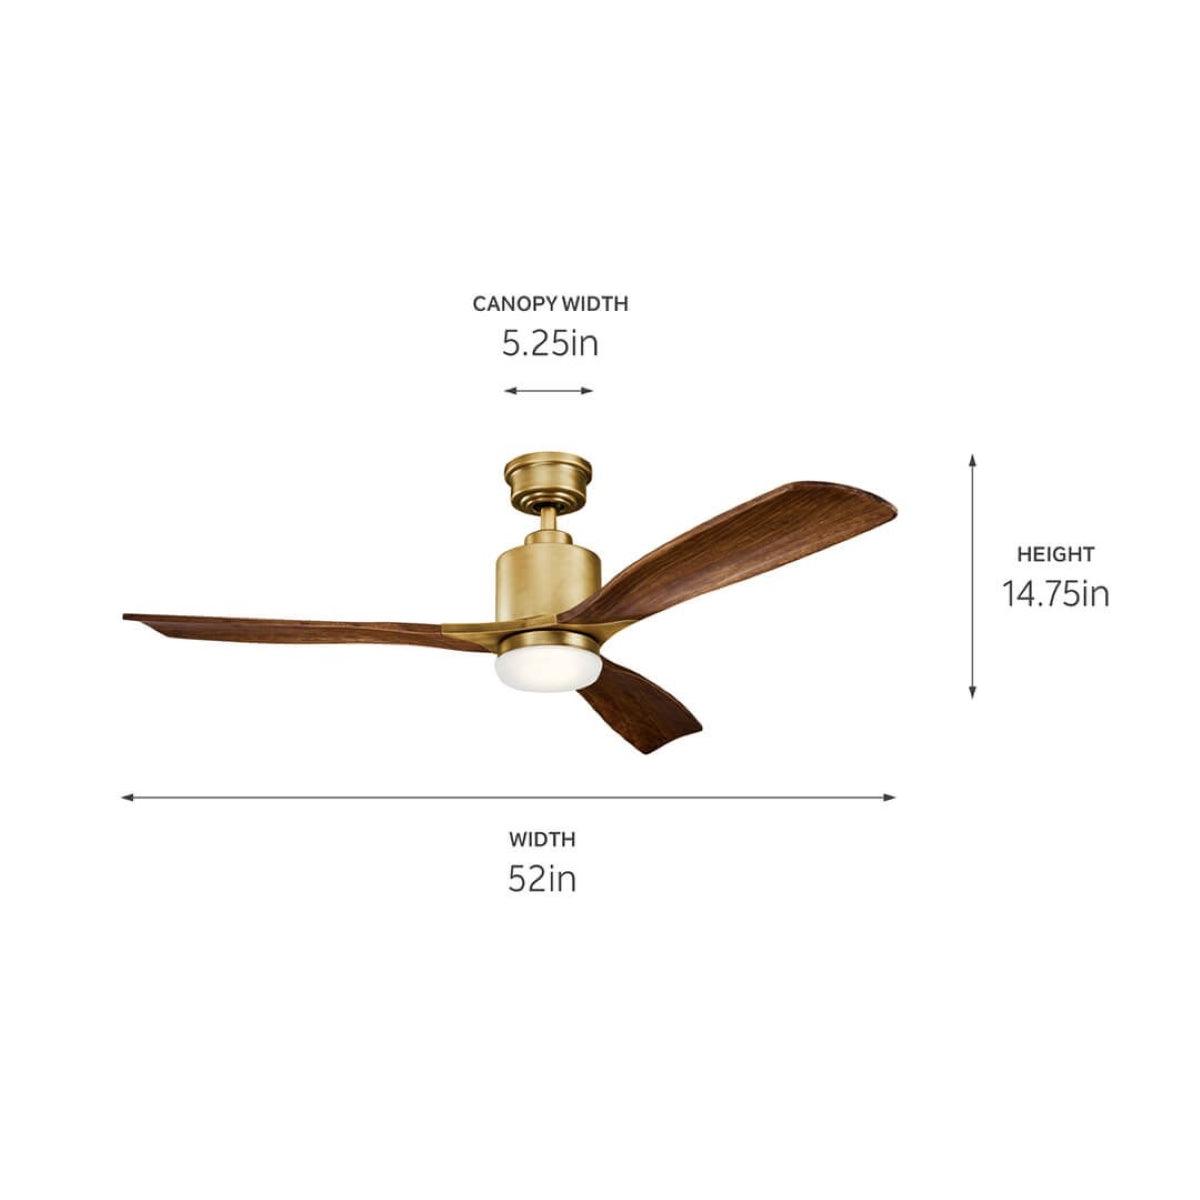 Ridley Ii 52 Inch Propeller Ceiling Fan With Light, Wall Control Included